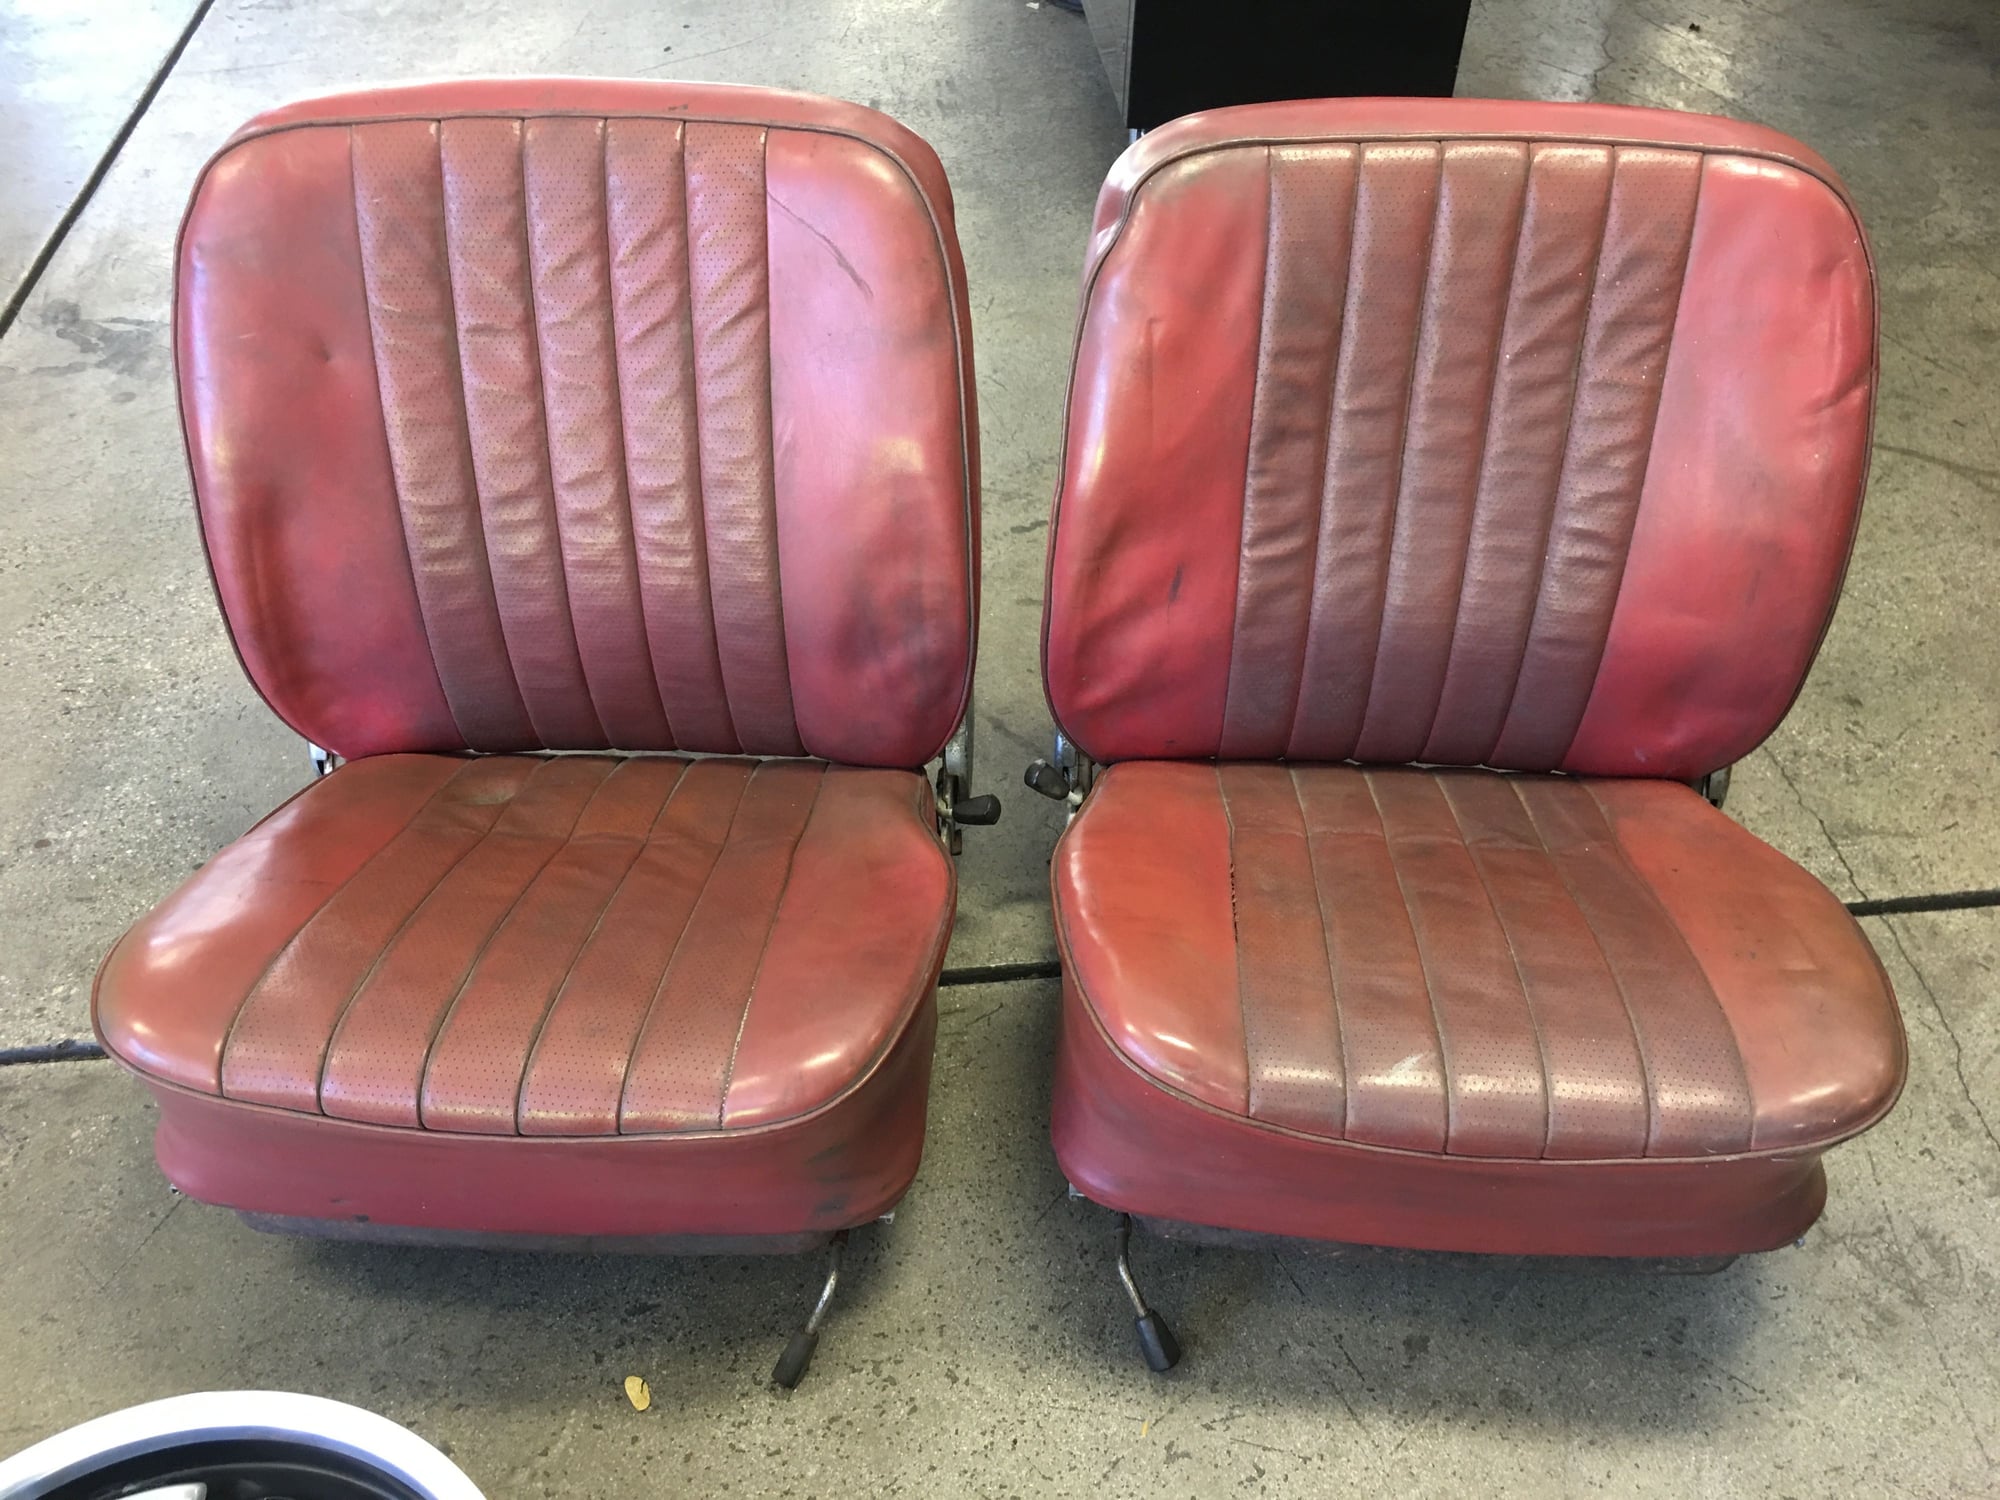 Interior/Upholstery - PORSCHE 901-911-912 ORIGINAL FRONT SEATS EARLY 911, 911-L, 911-S USED - Used - Los Angeles, CA 90026, United States